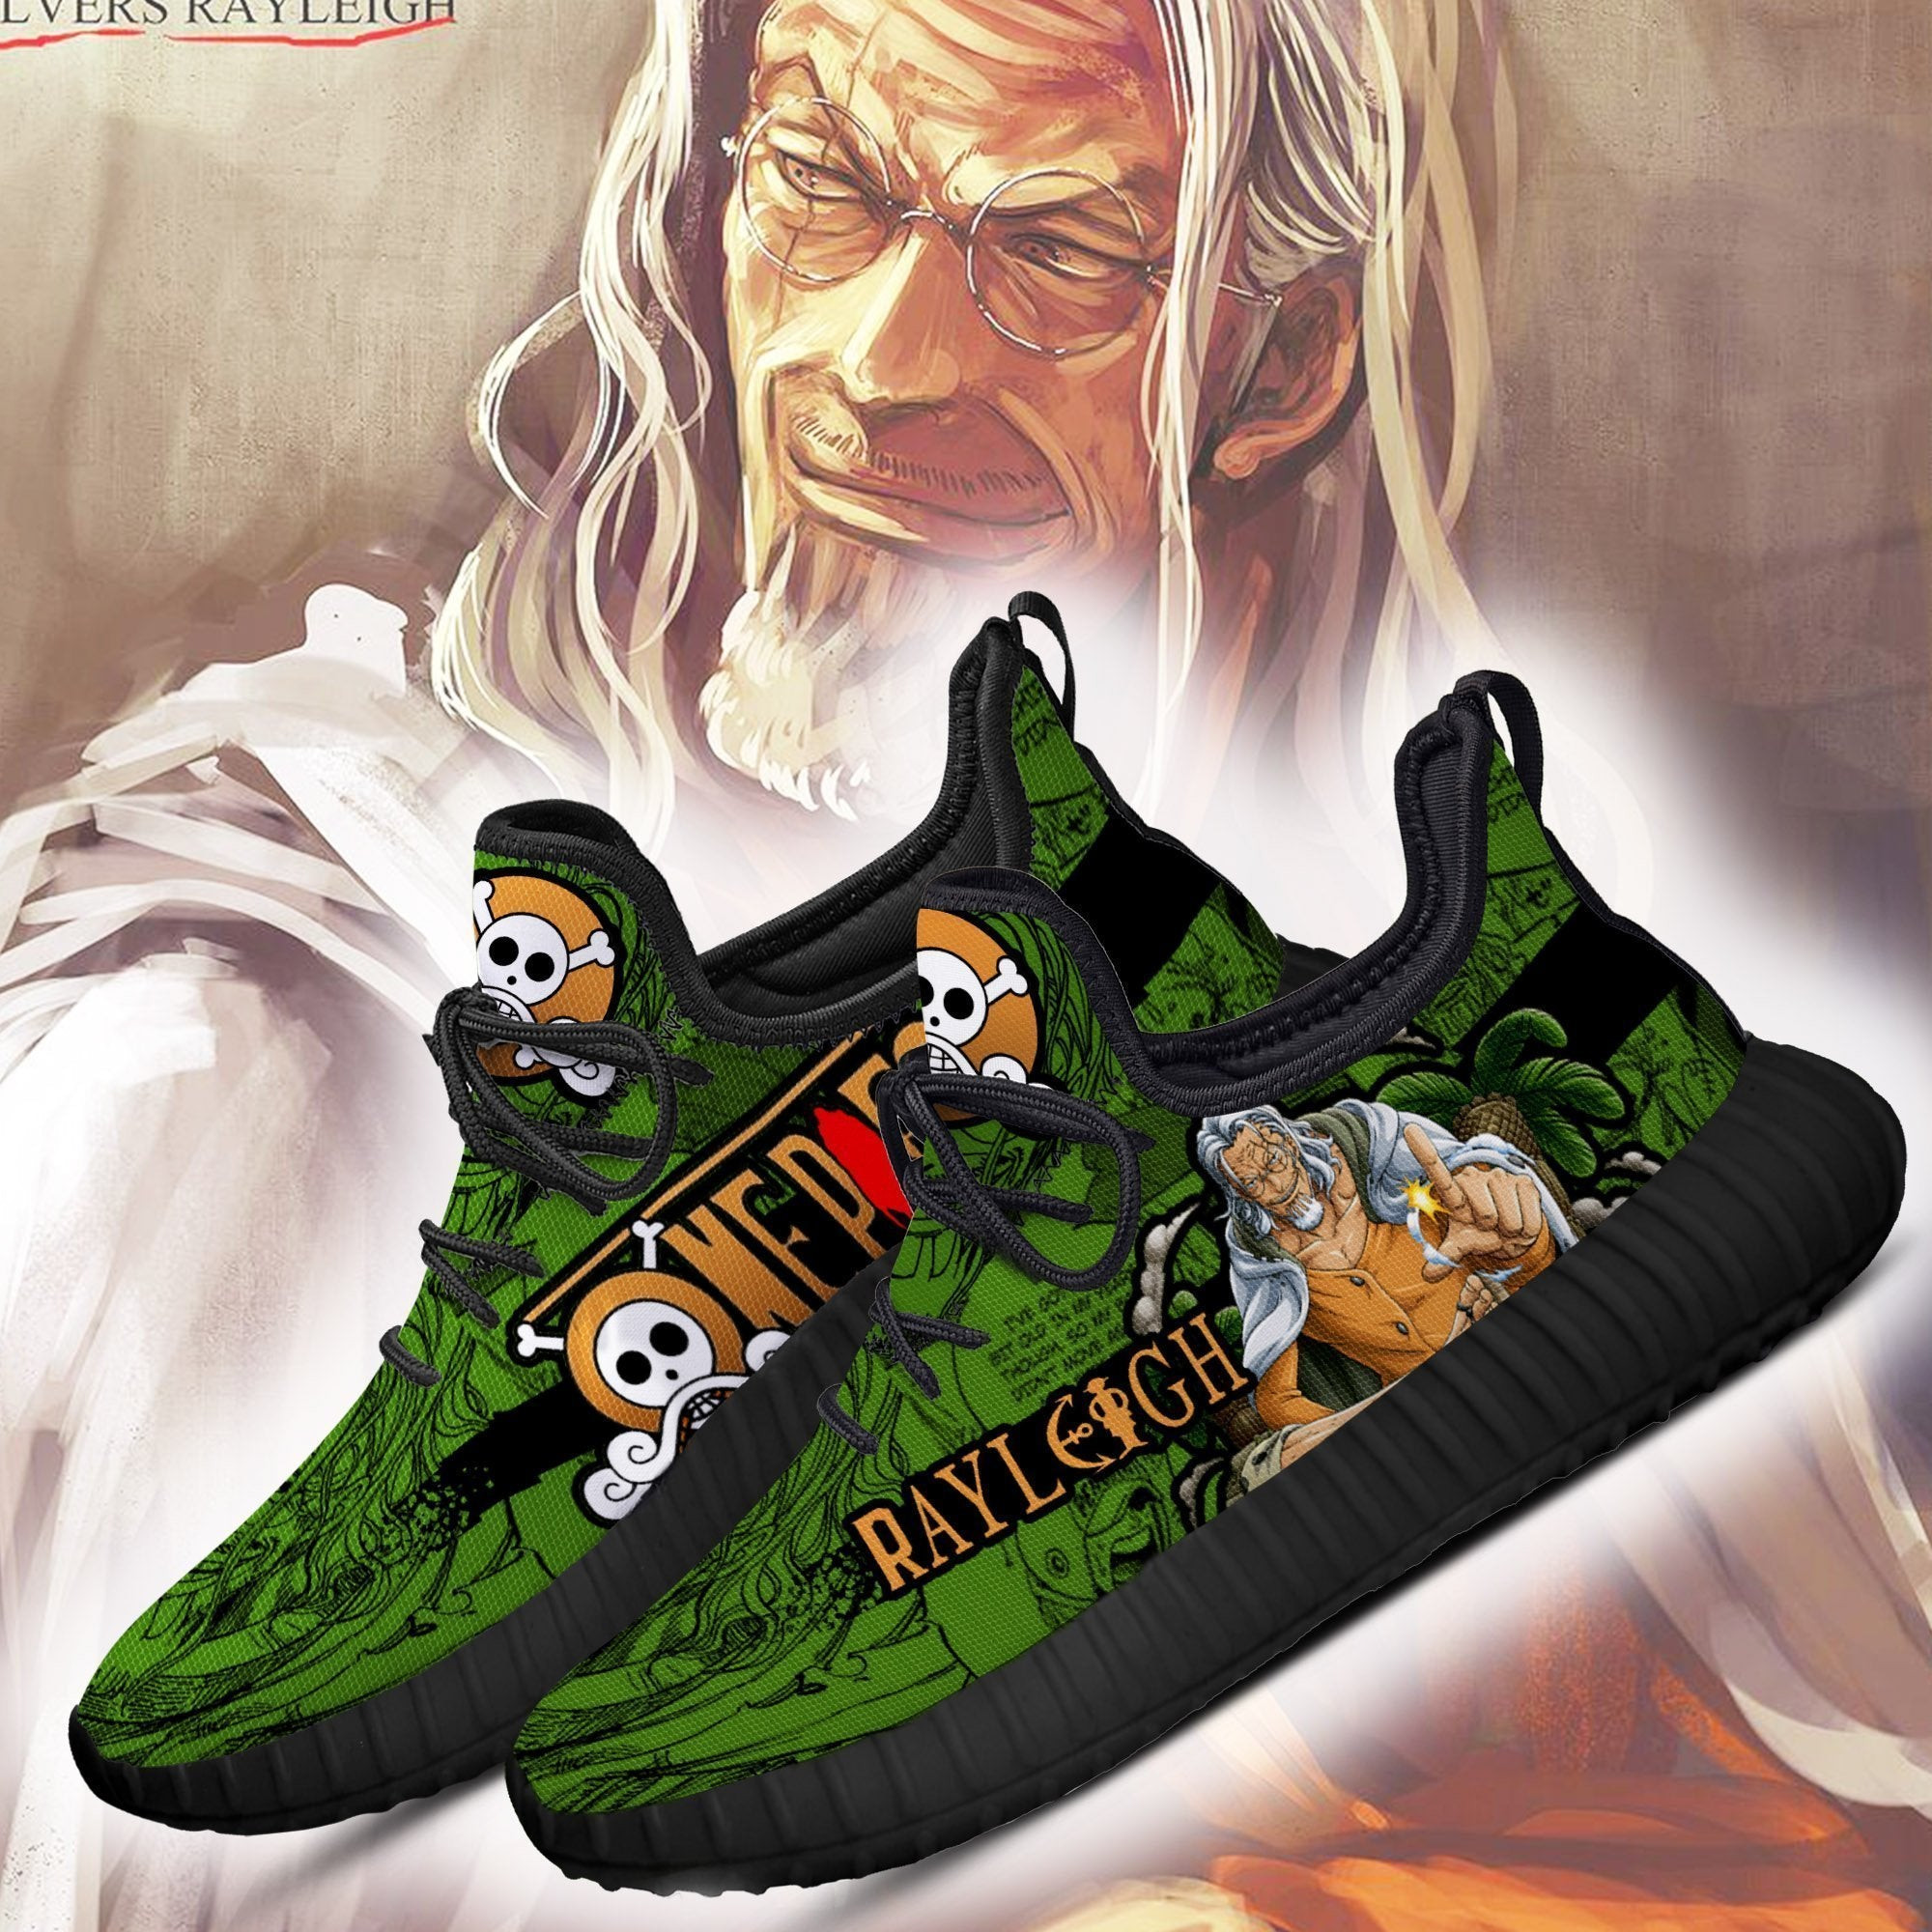 BEST One Piece Rayleigh One Piece Reze Shoes Sneaker2